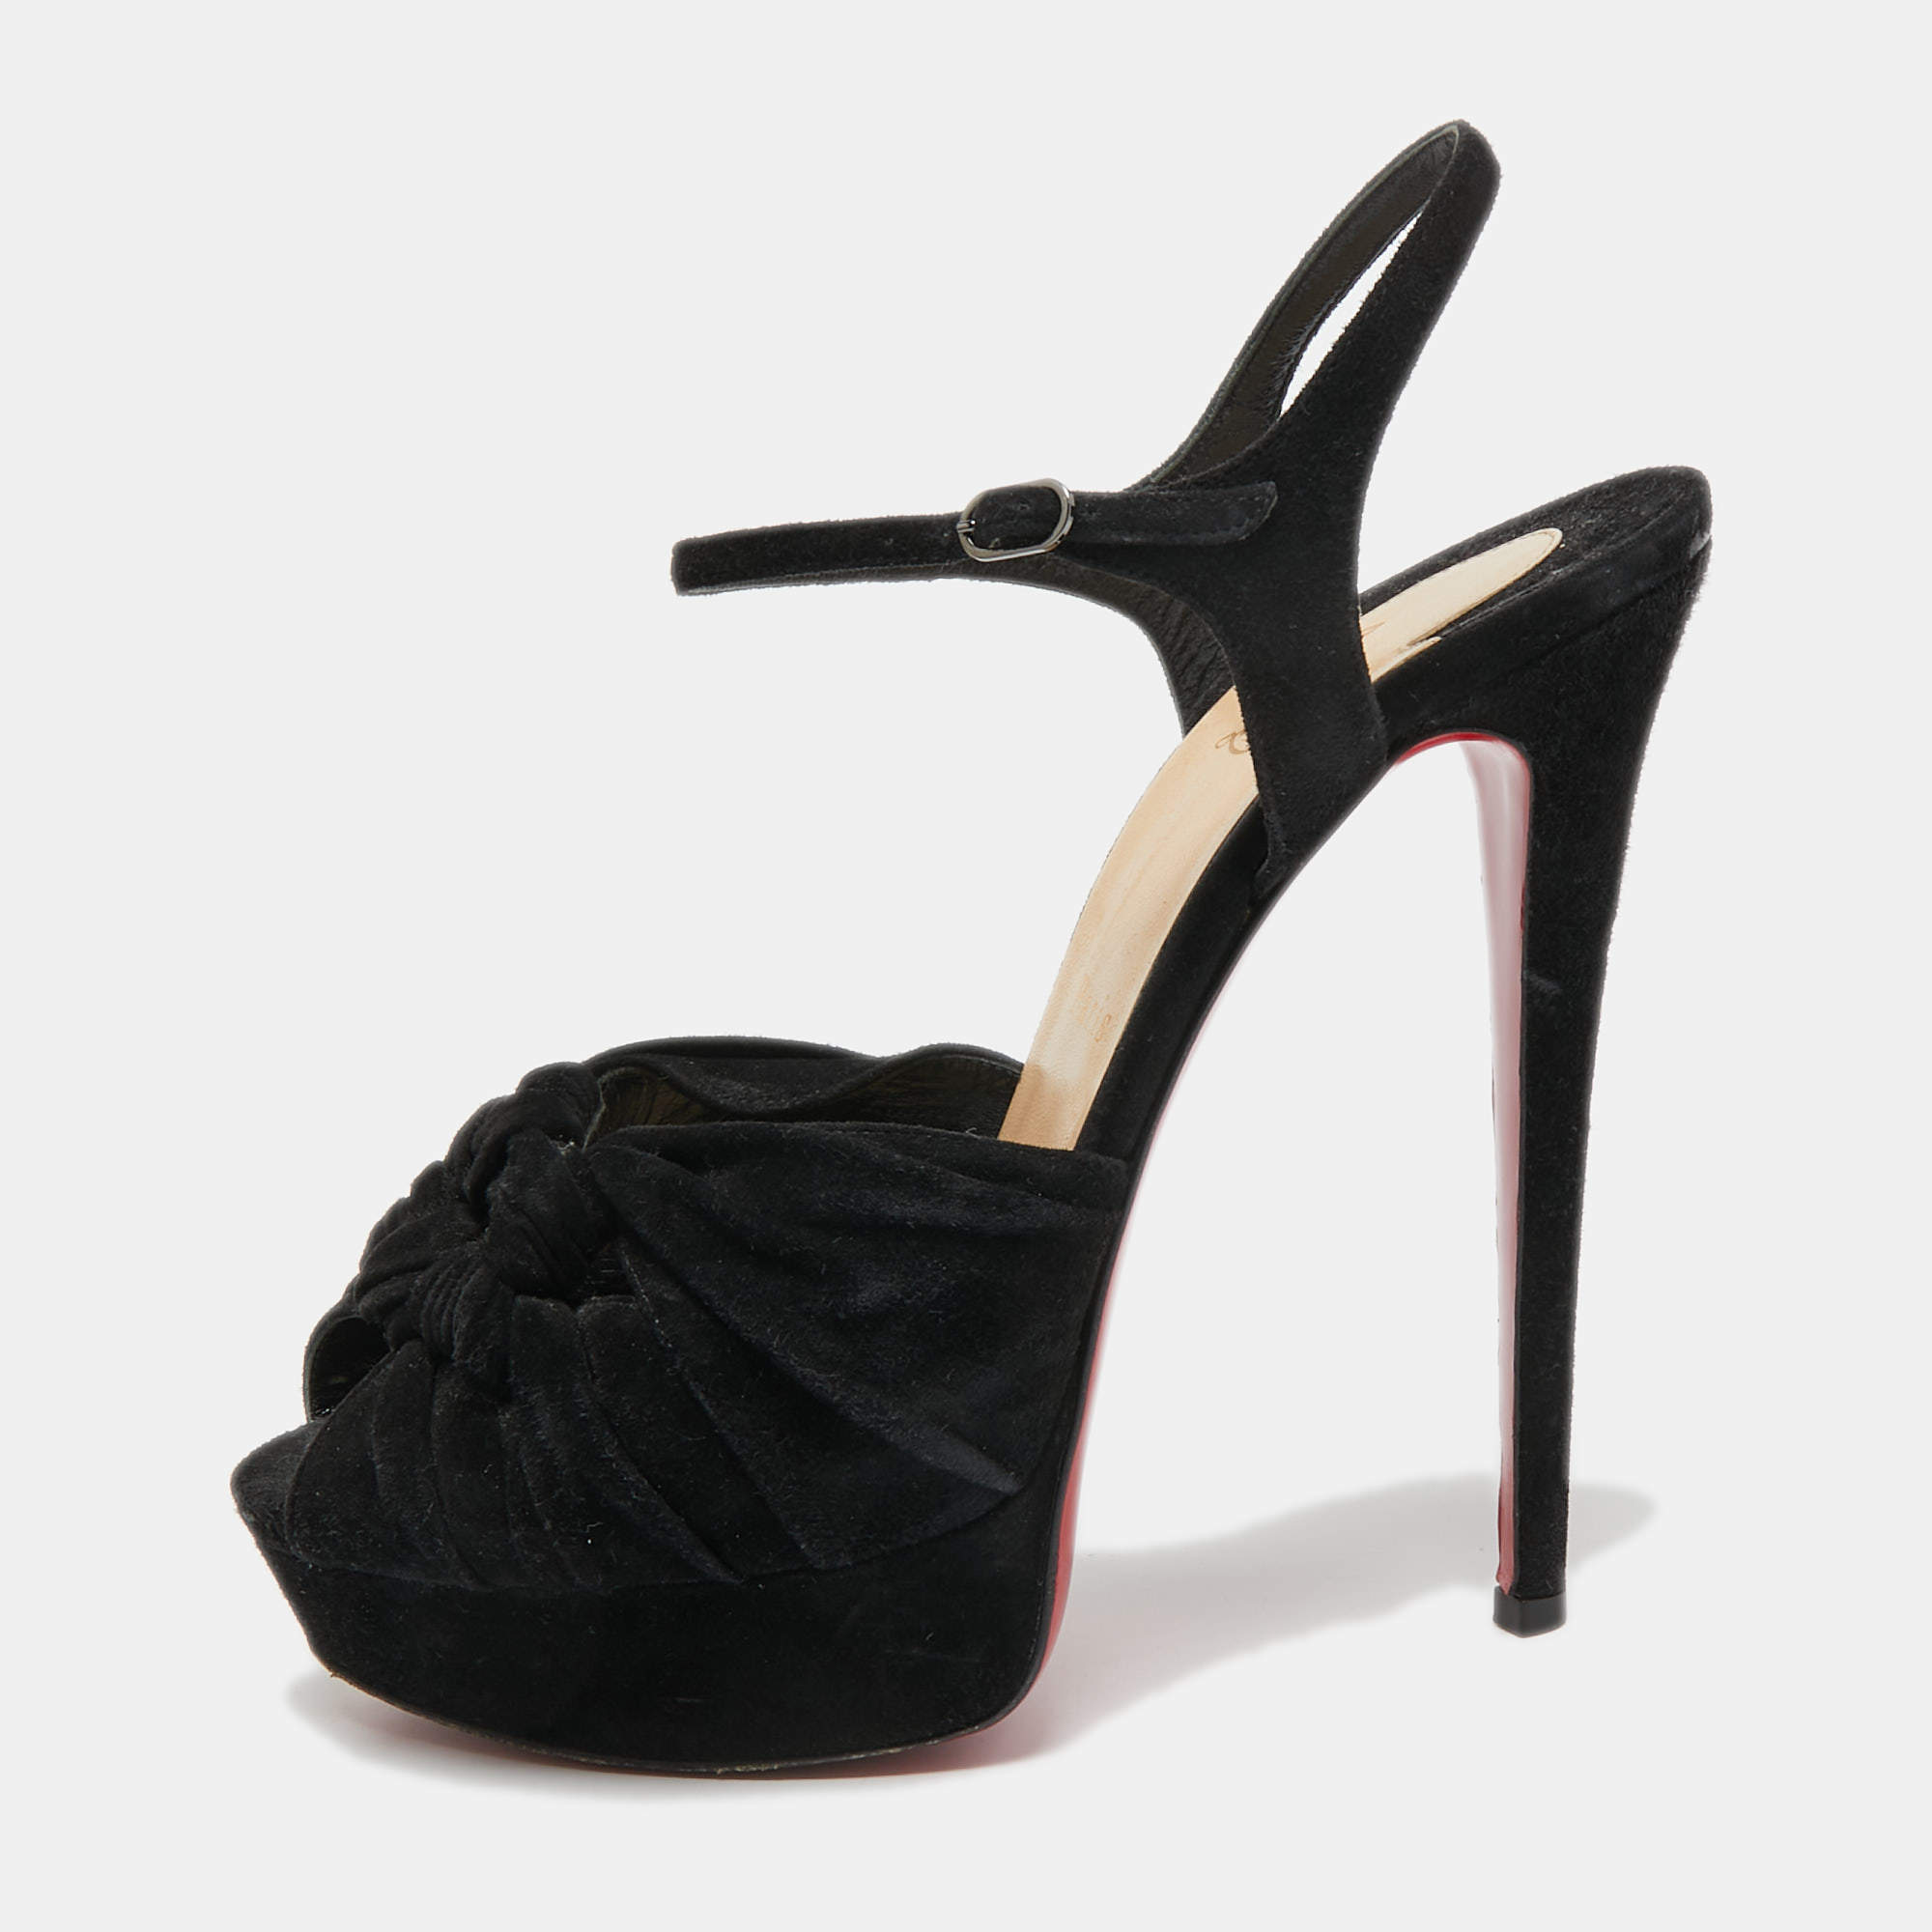 Christian Louboutin Black/Gold Suede Peep Toe Ankle Strap Sandals Size 36  Christian Louboutin | The Luxury Closet